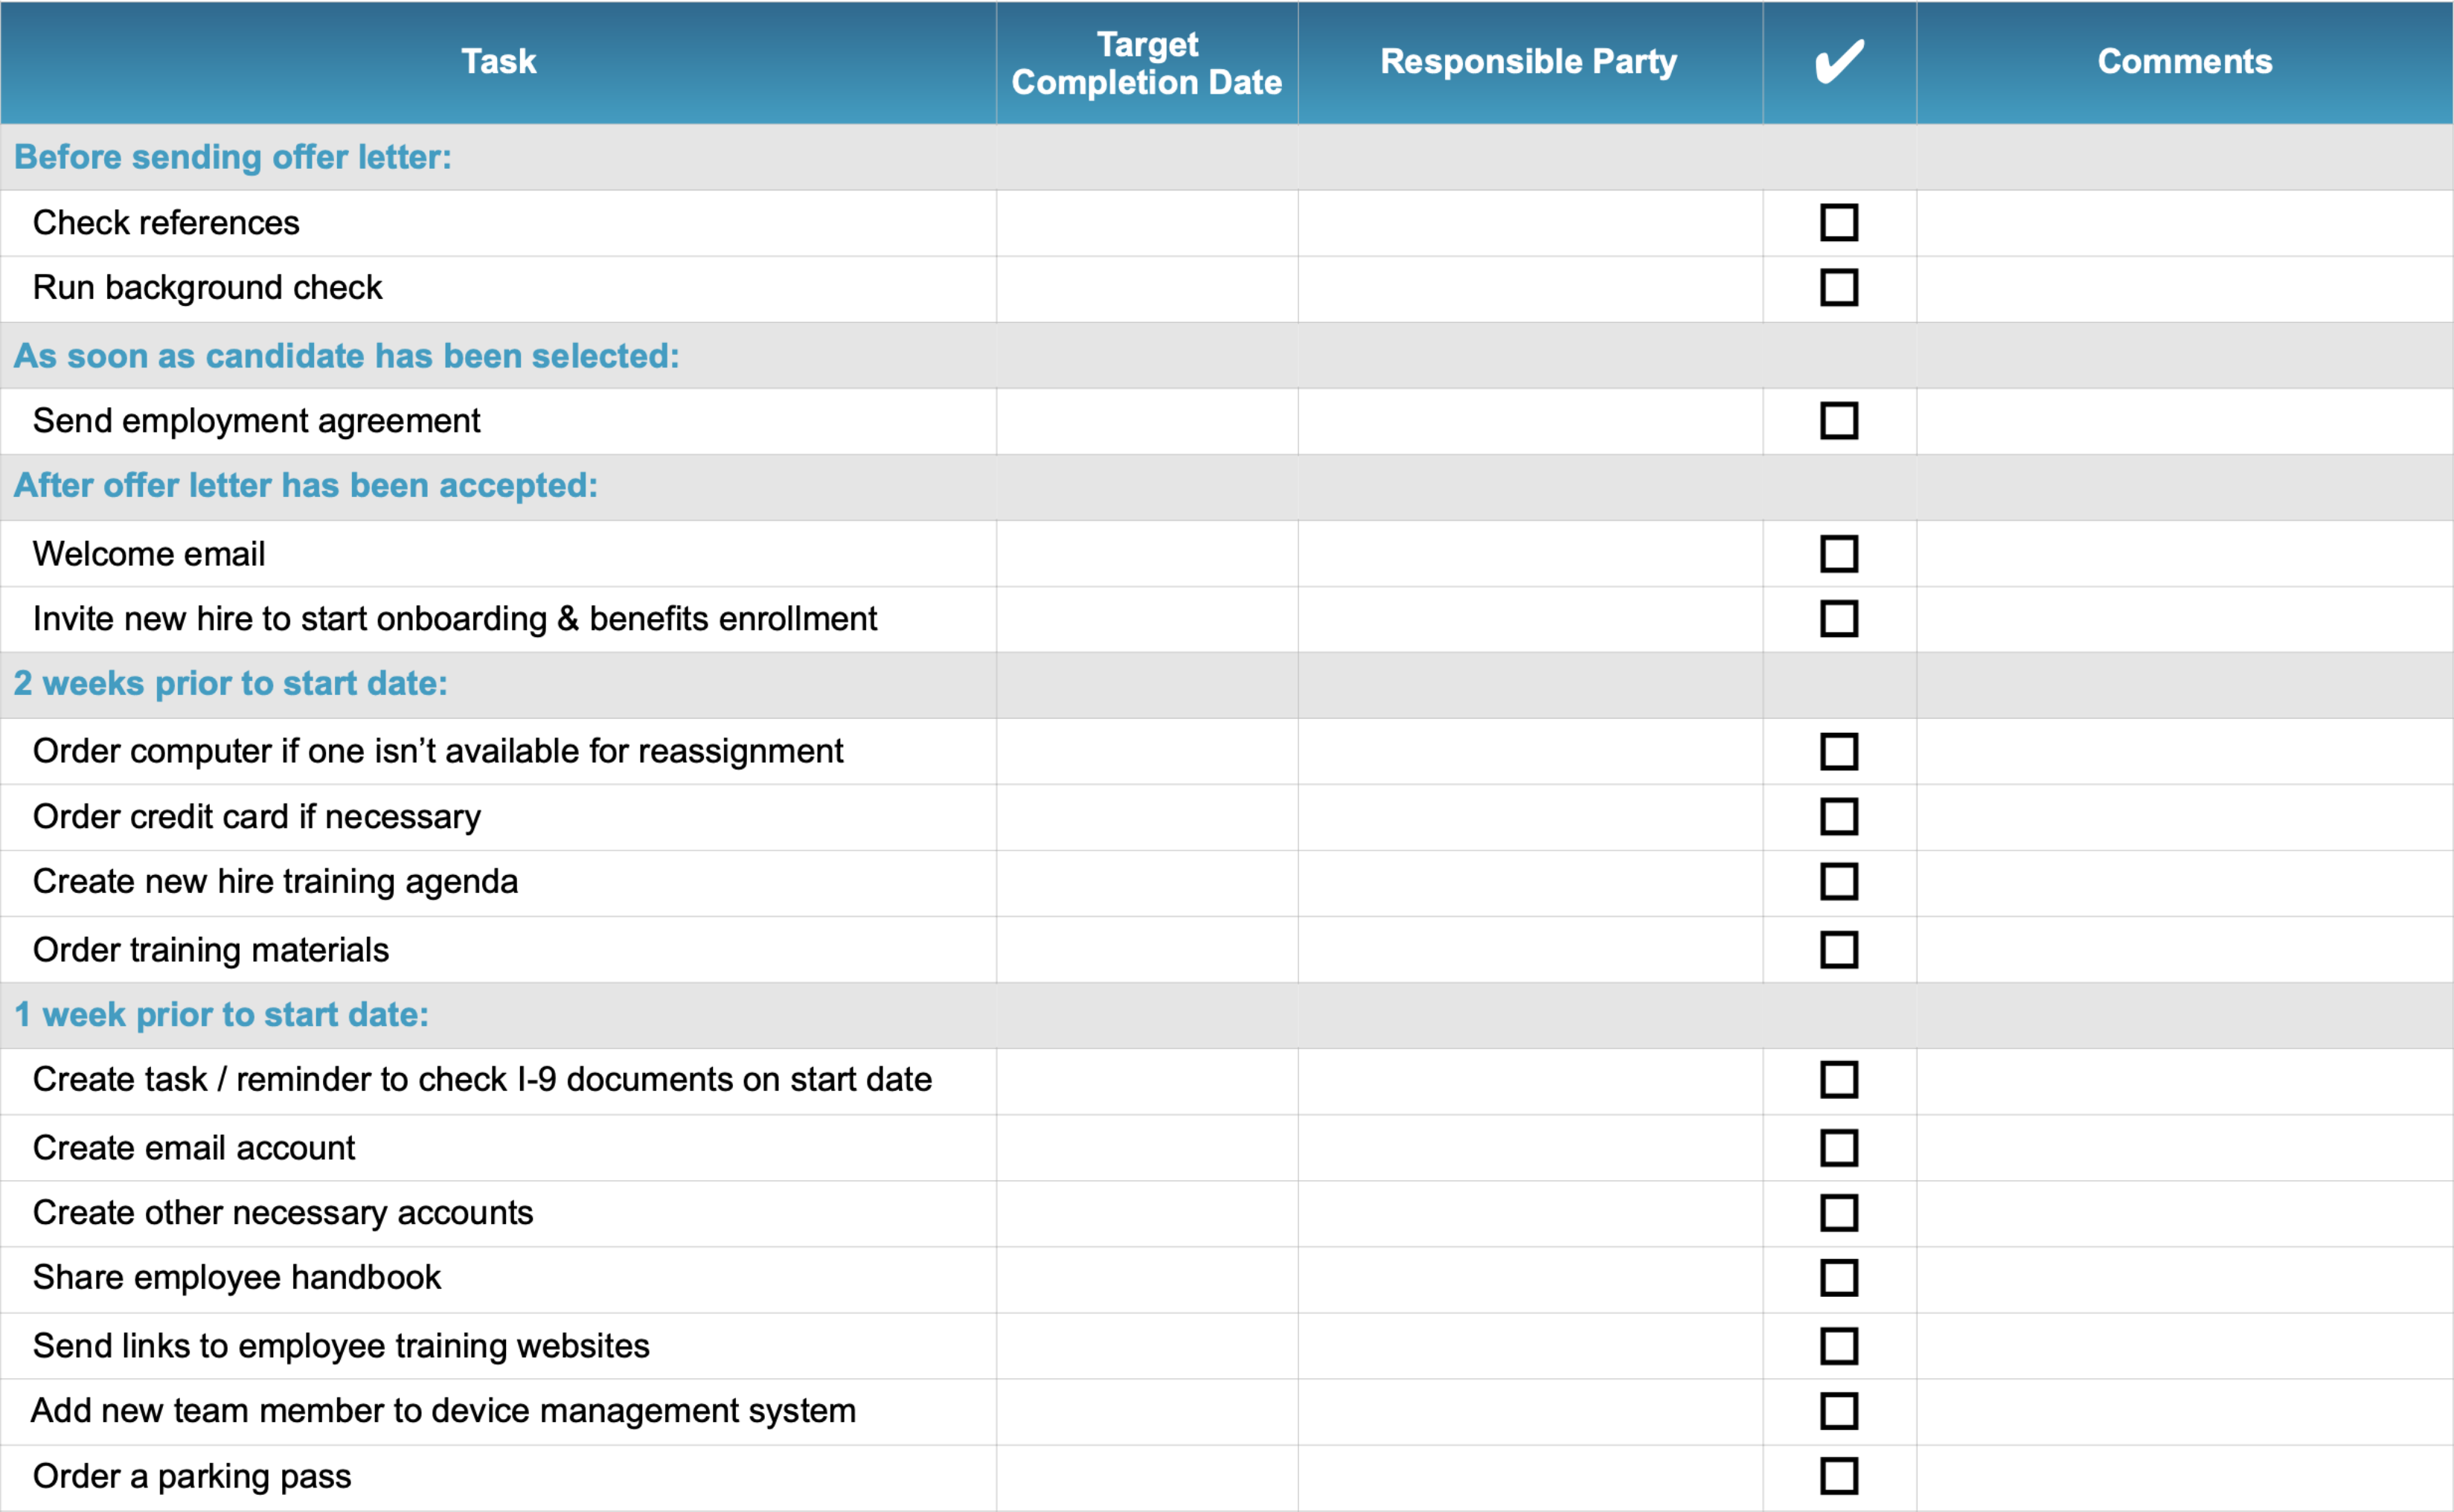 it-onboarding-checklist-template